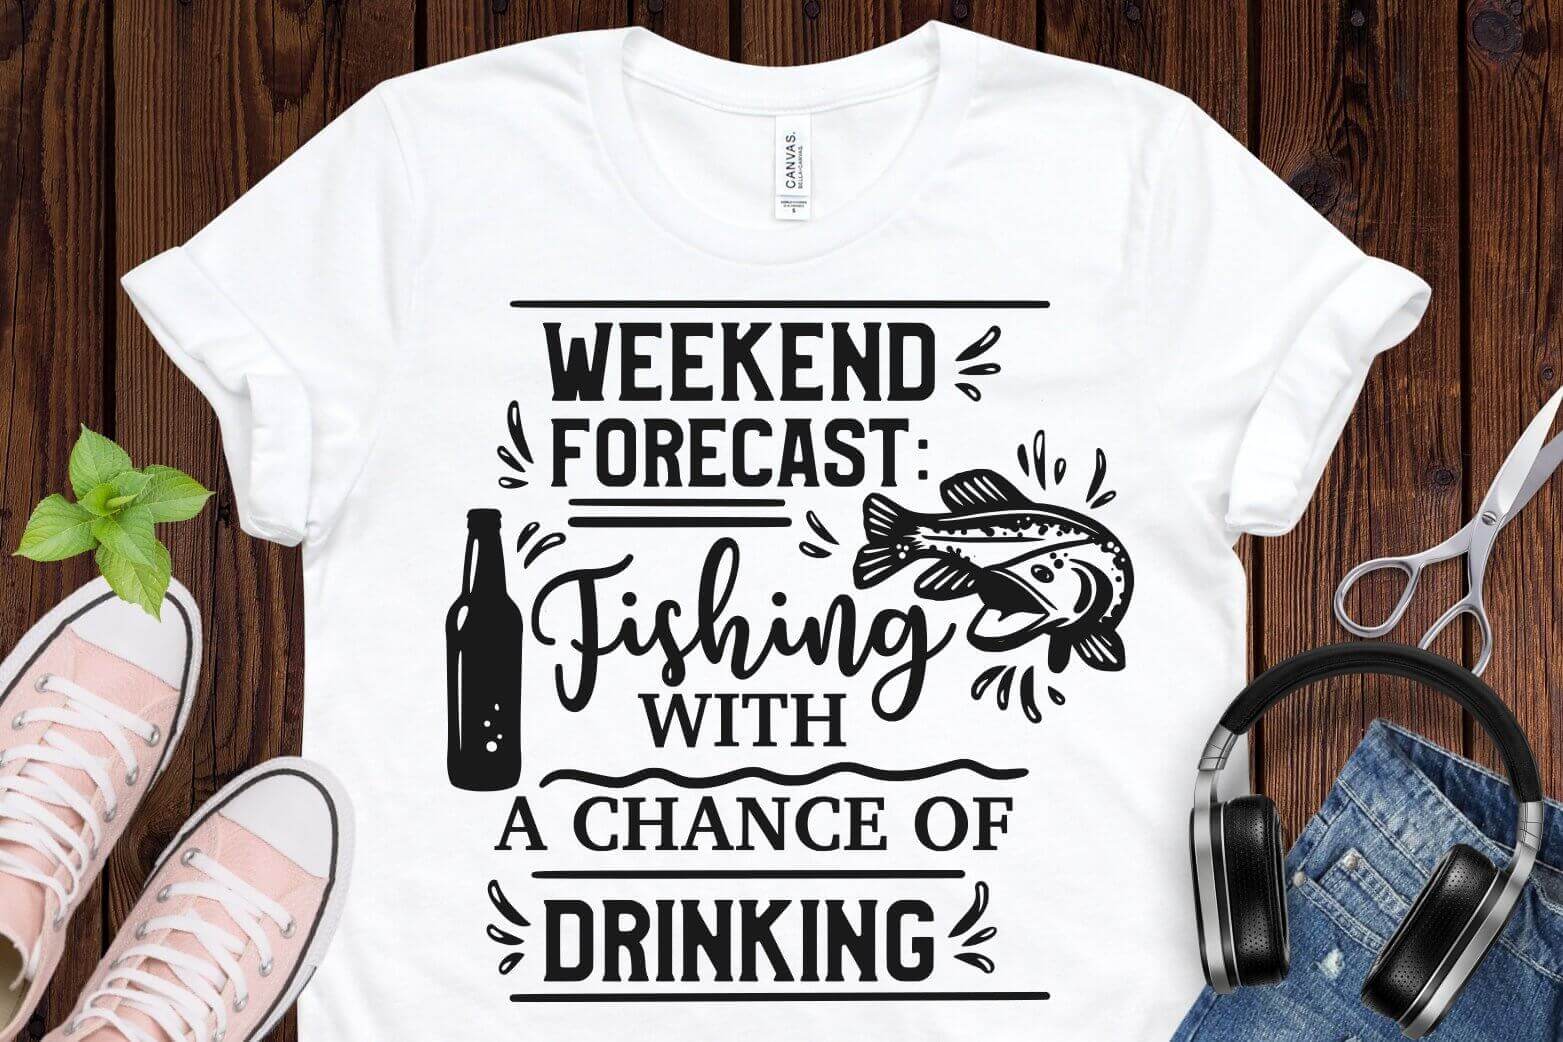 Weekend Forecast: Fishing with a Chance of Drinking.